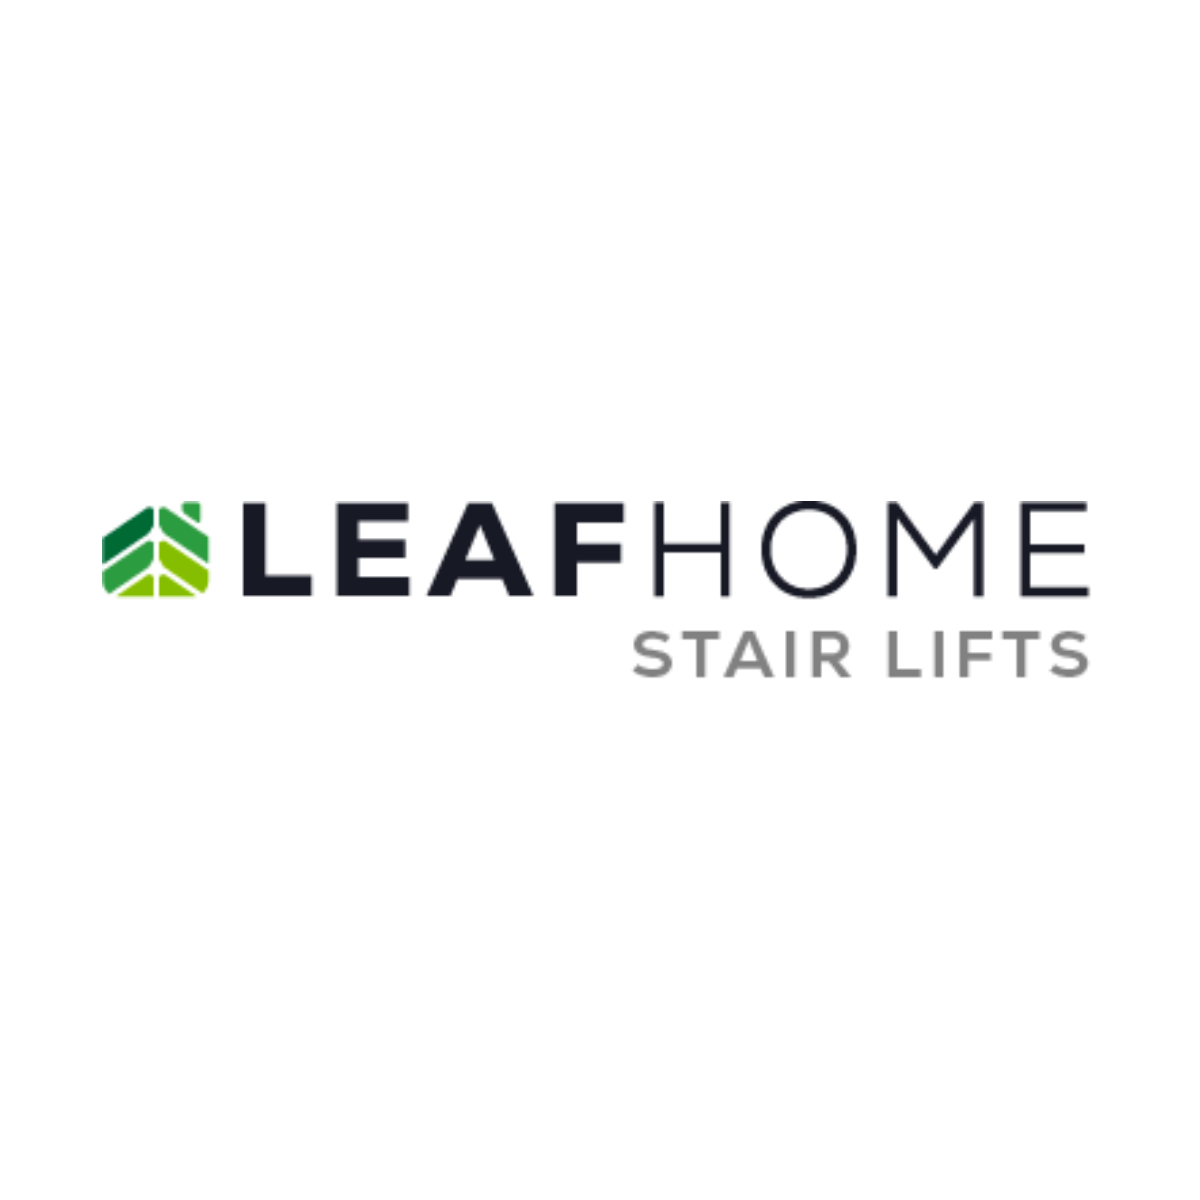 Leaf Home Stairlift - Tampa, FL 33619 - (813)819-3531 | ShowMeLocal.com